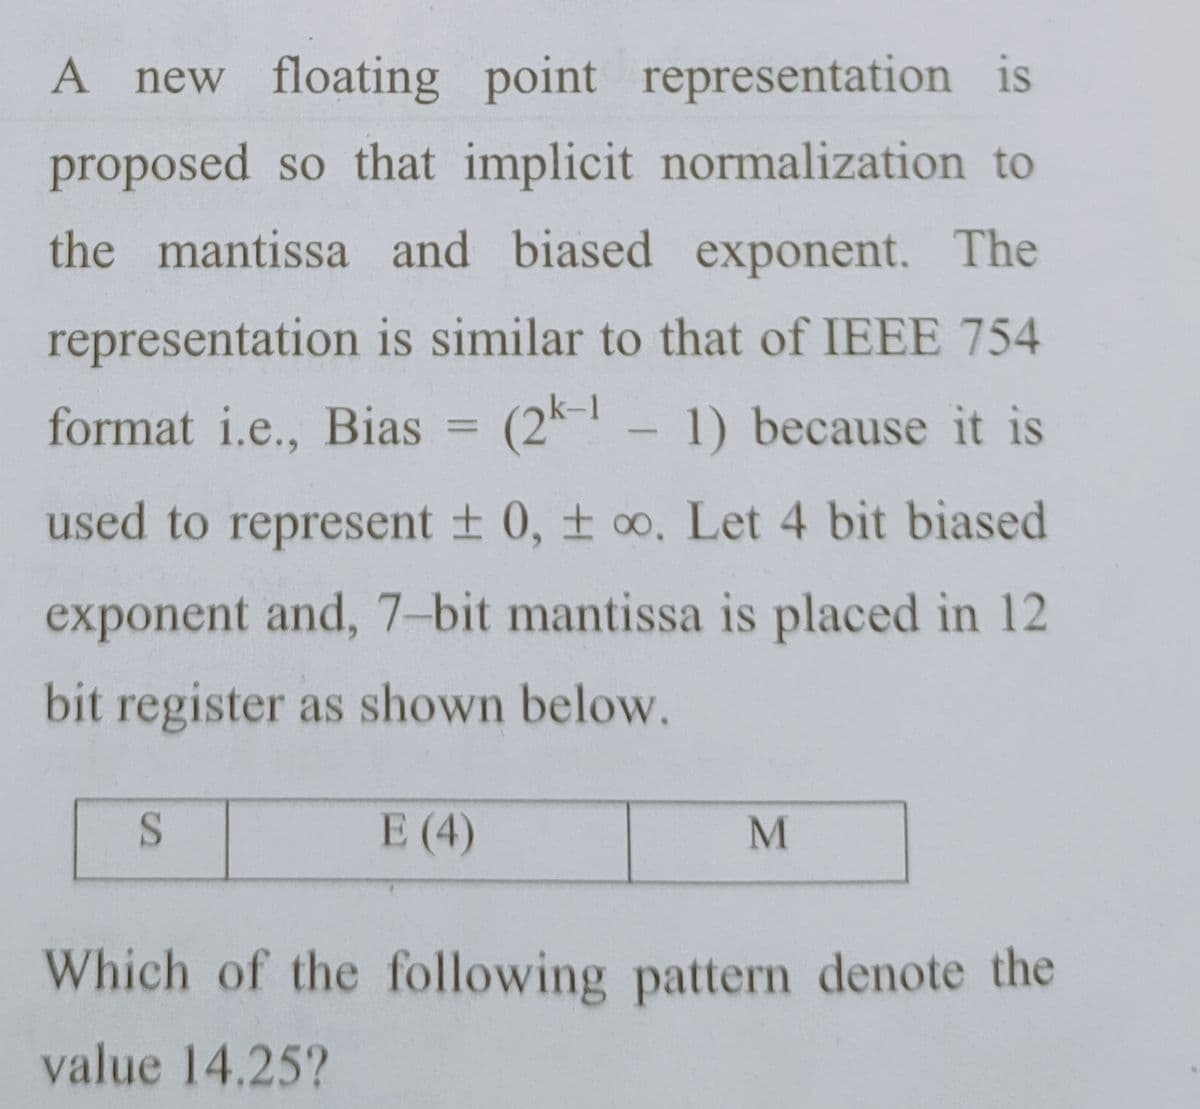 A new floating point representation is
proposed so that implicit normalization to
the mantissa and biased exponent. The
representation is similar to that of IEEE 754
format i.e., Bias =
(2k - 1) because it is
%3D
used to represent + 0, t oo. Let 4 bit biased
exponent and, 7-bit mantissa is placed in 12
bit register as shown below.
E (4)
Which of the following pattern denote the
value 14.25?
